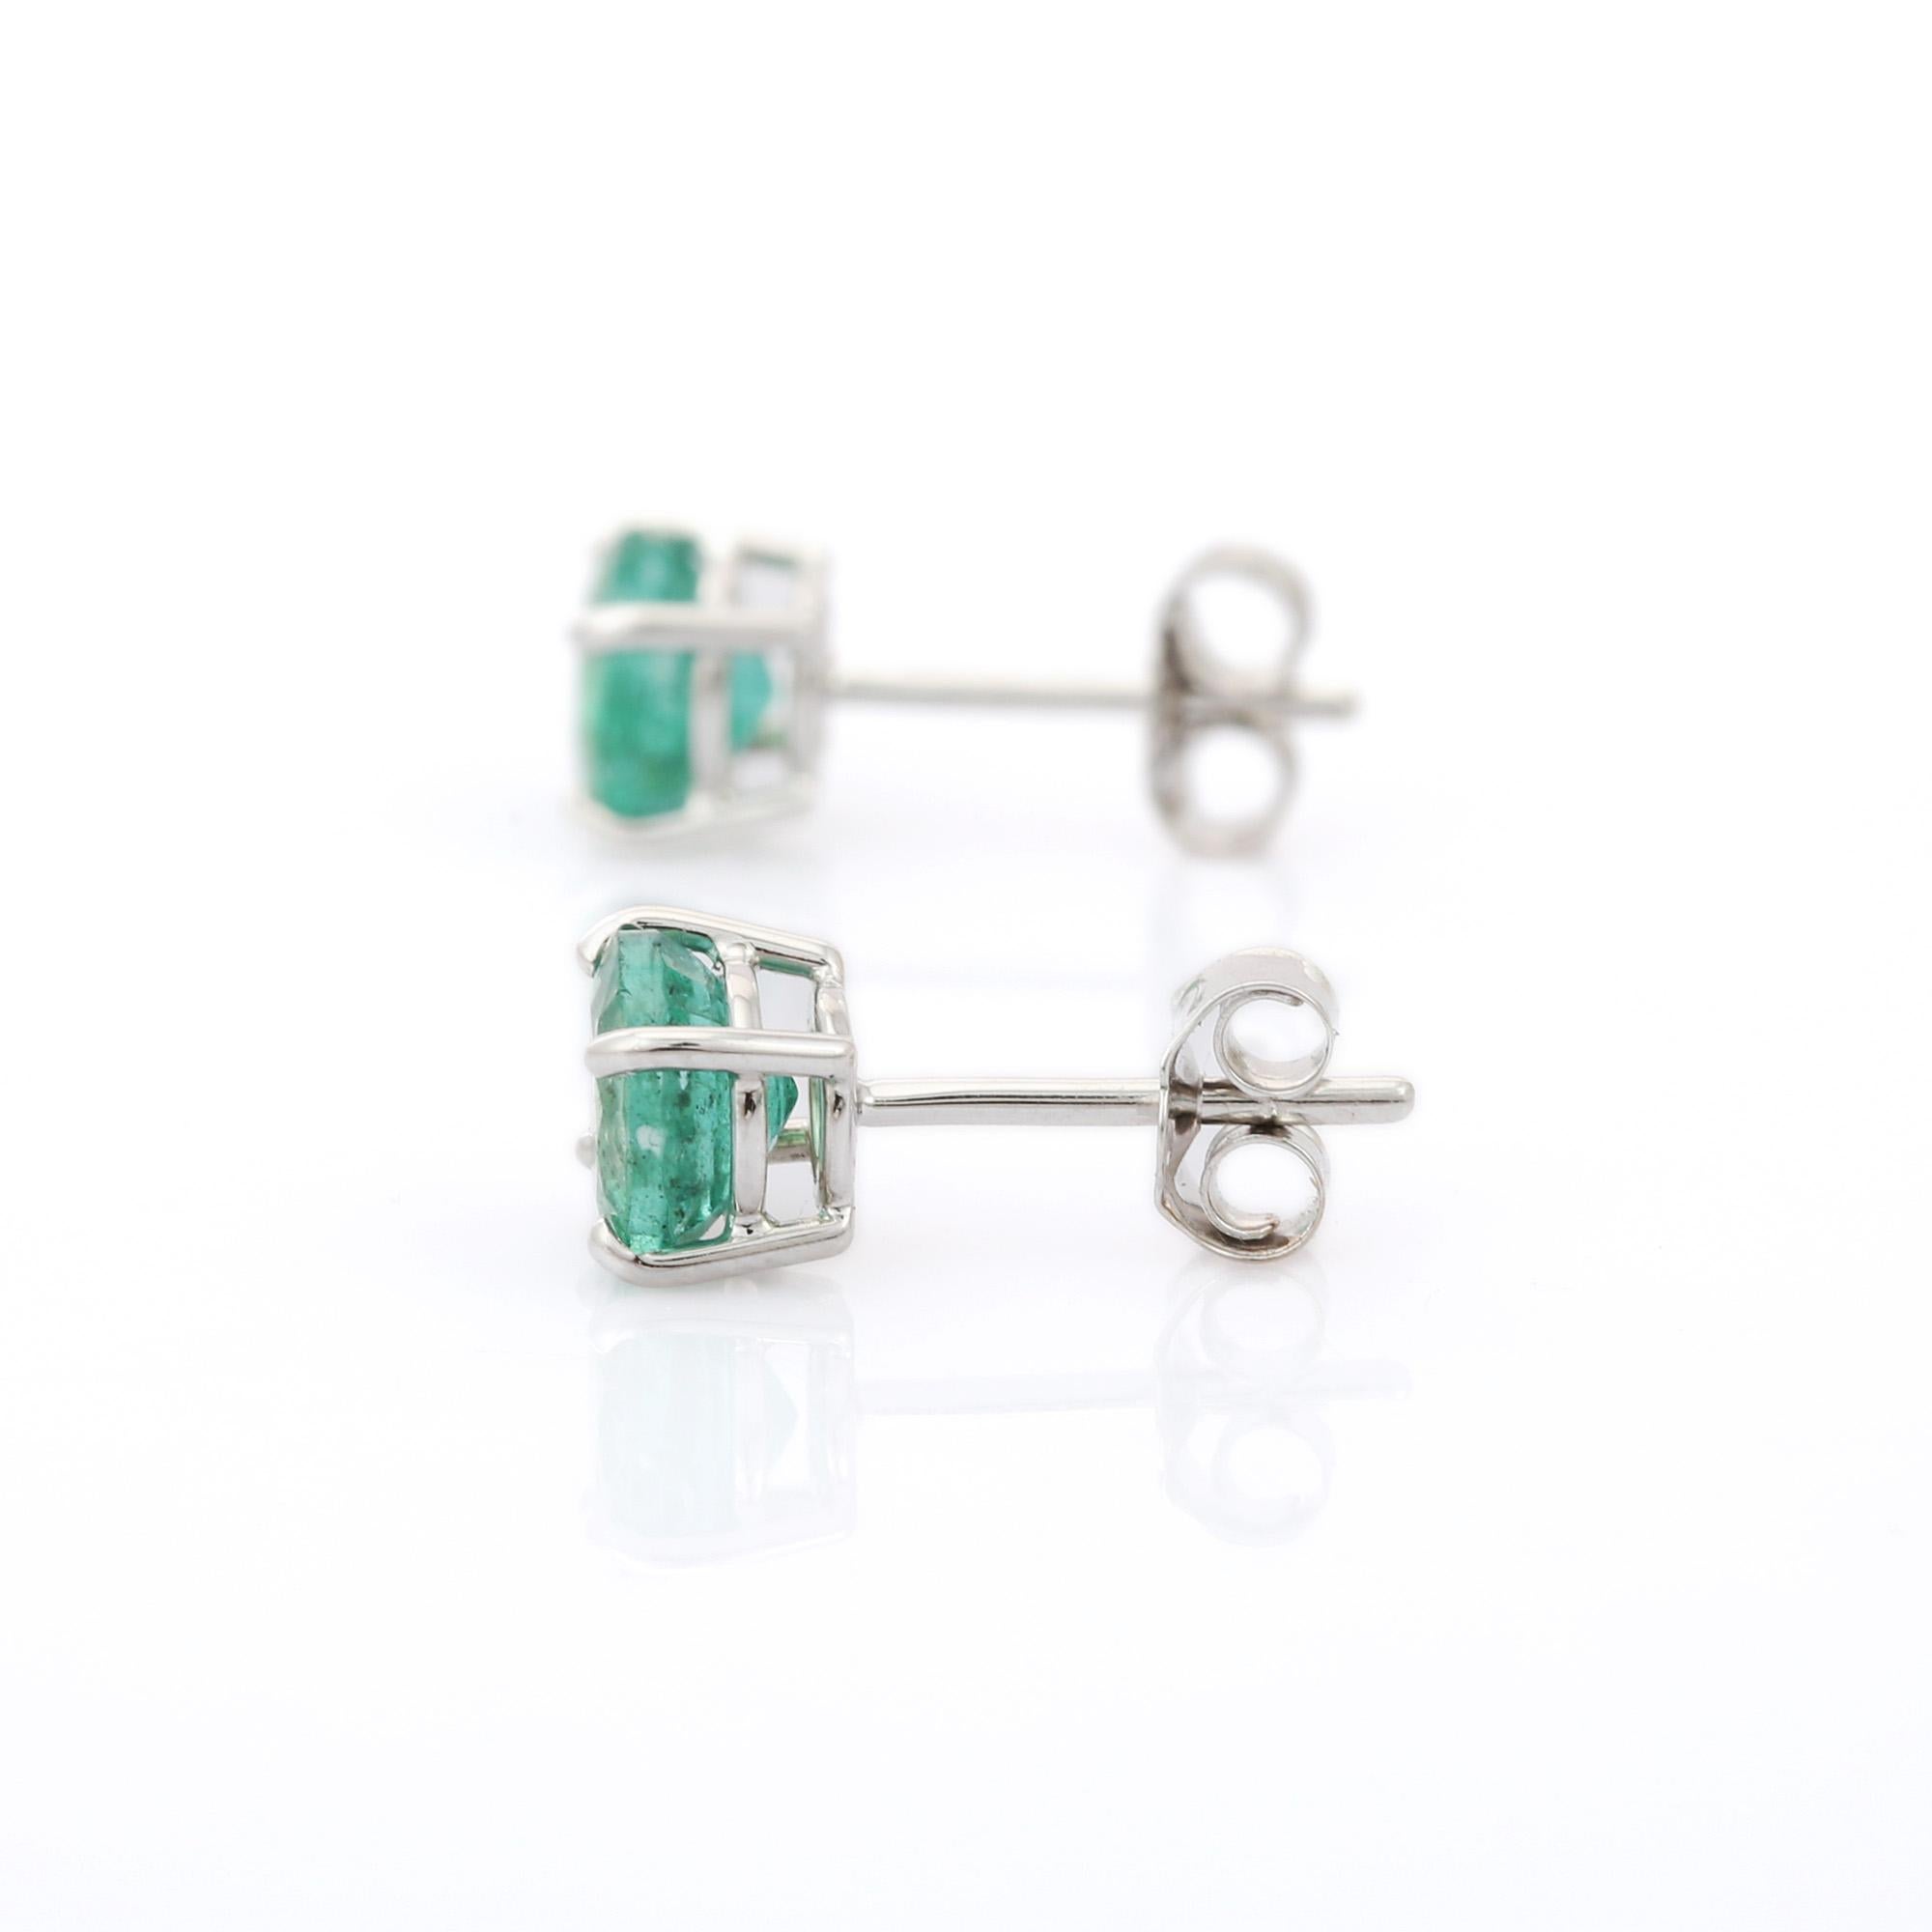 Round Cut 1.63 Carat Green Emerald Stud Earrings Set in 18K White Gold  In New Condition For Sale In Houston, TX